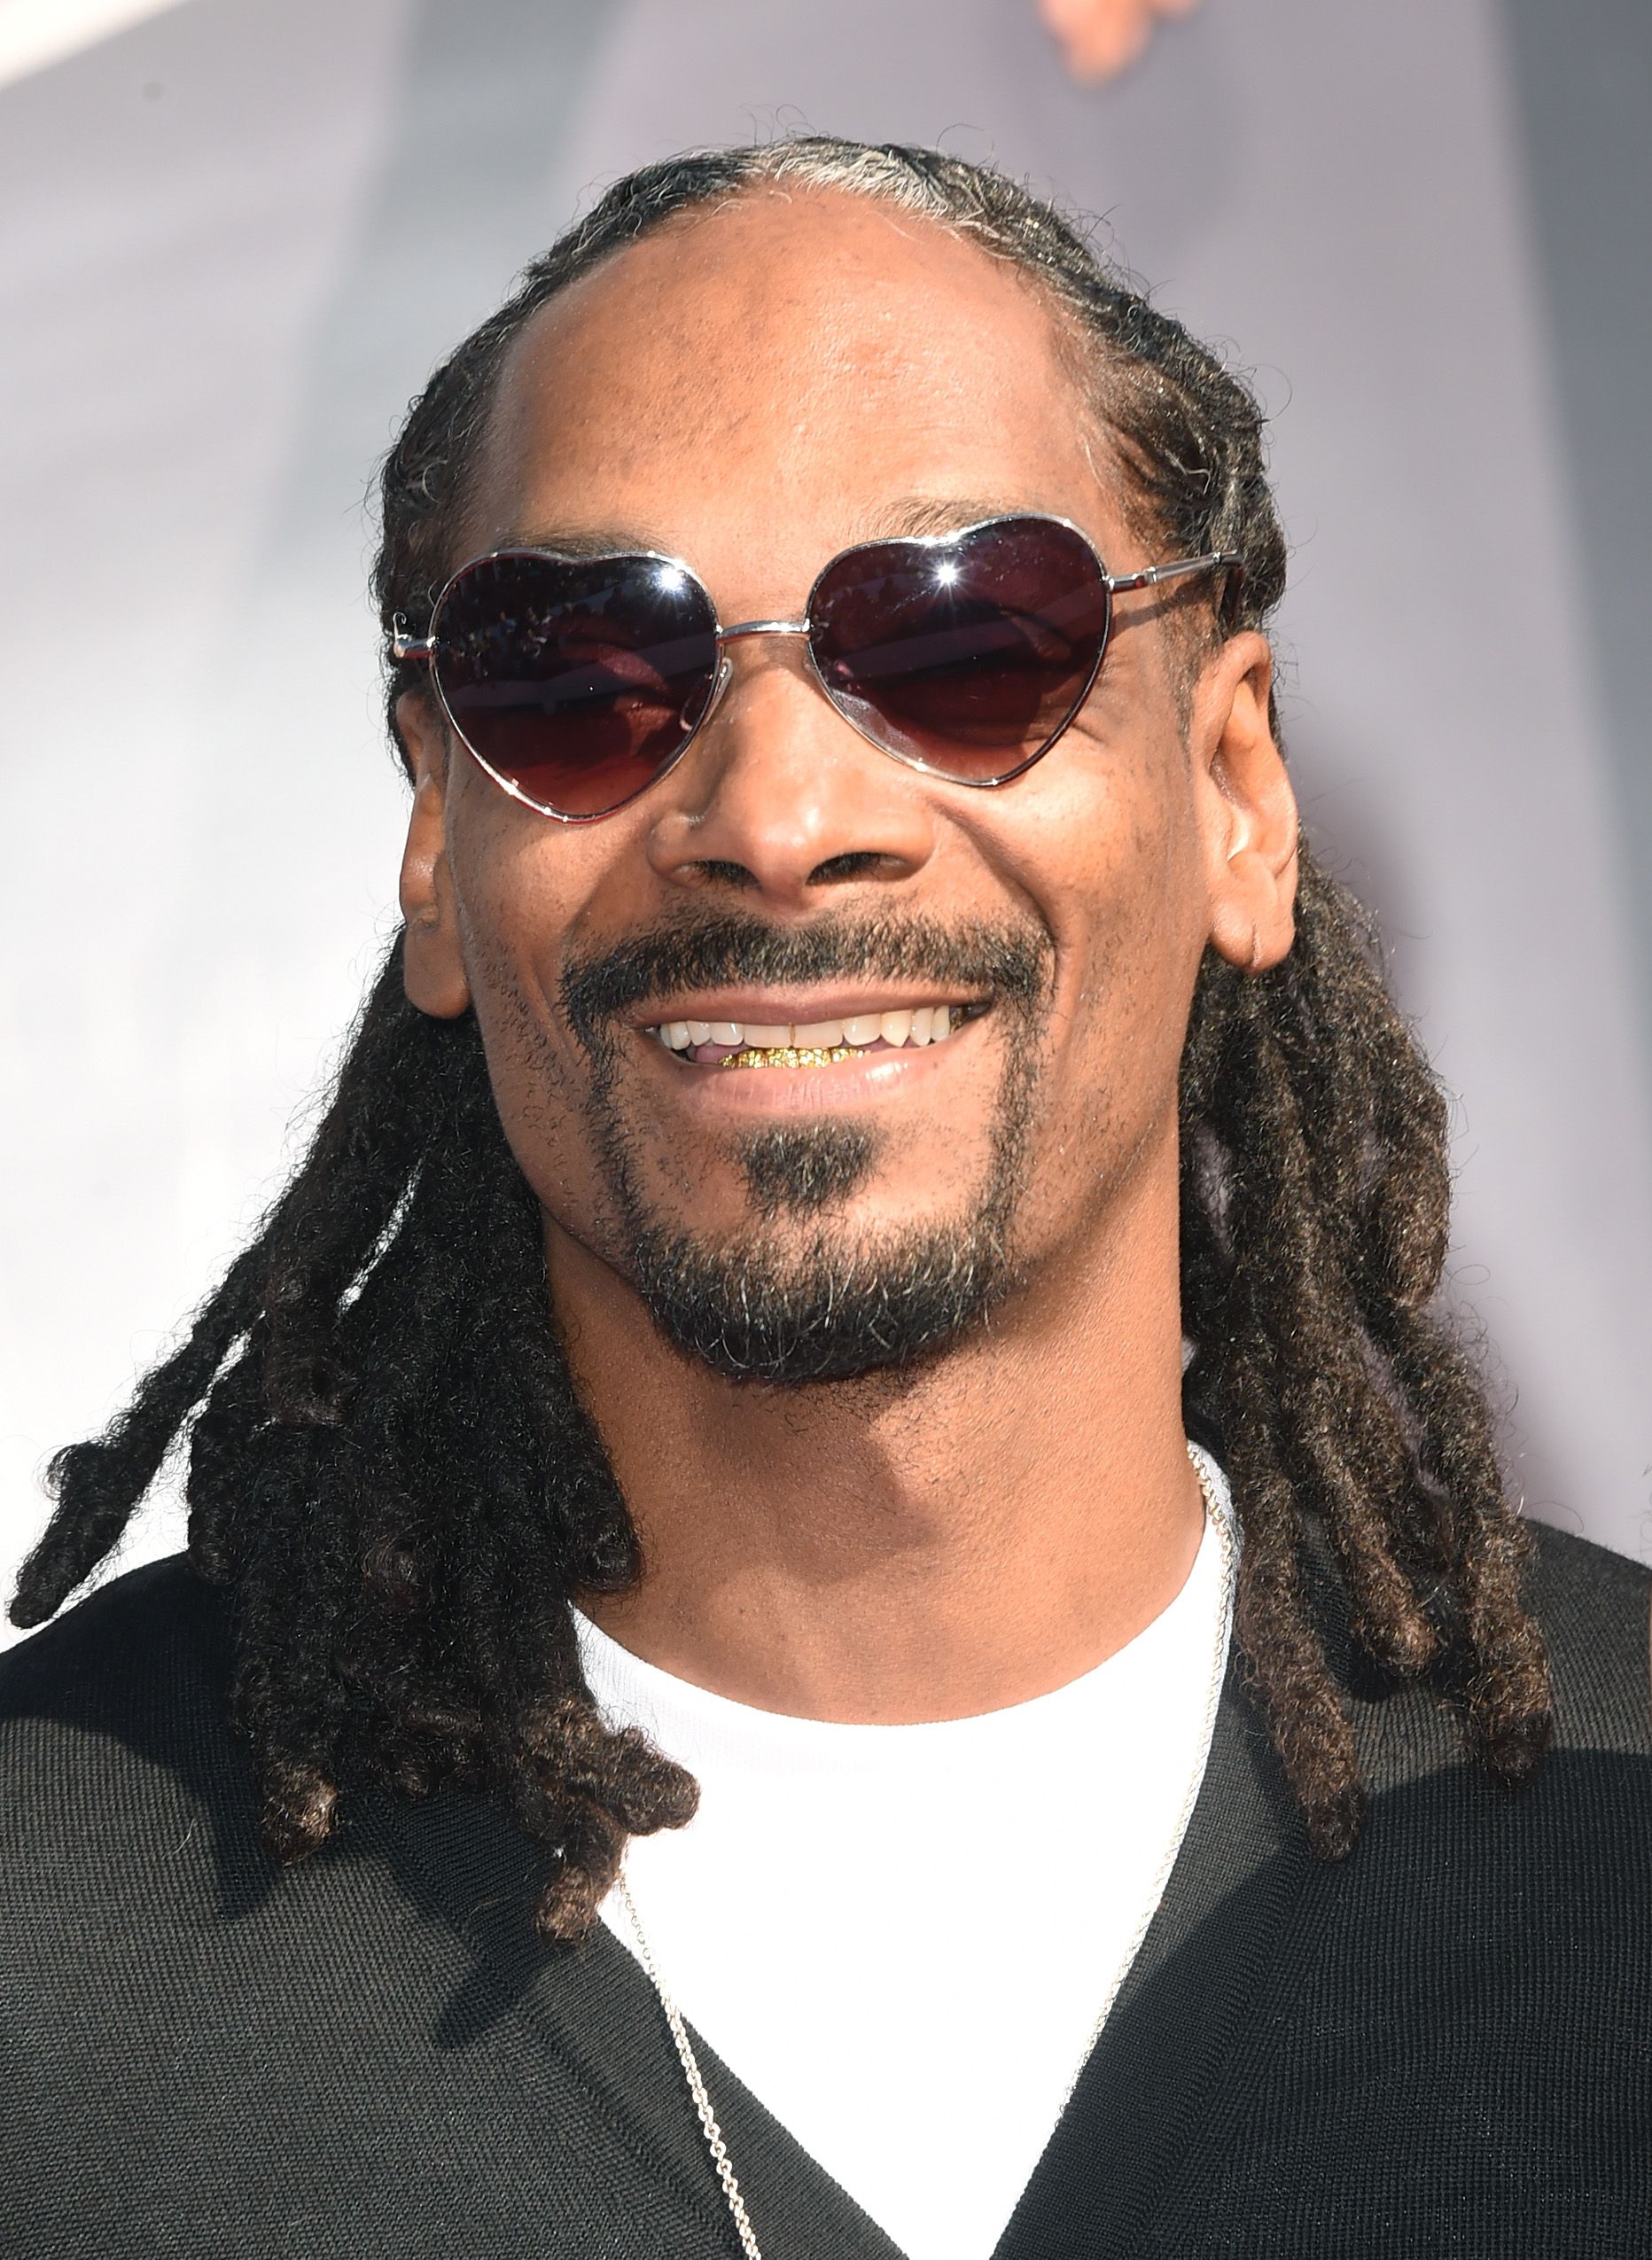 Snoop Dogg at the MTV Video Music Awards on August 24, 2014 in California. | Photo: Getty Images